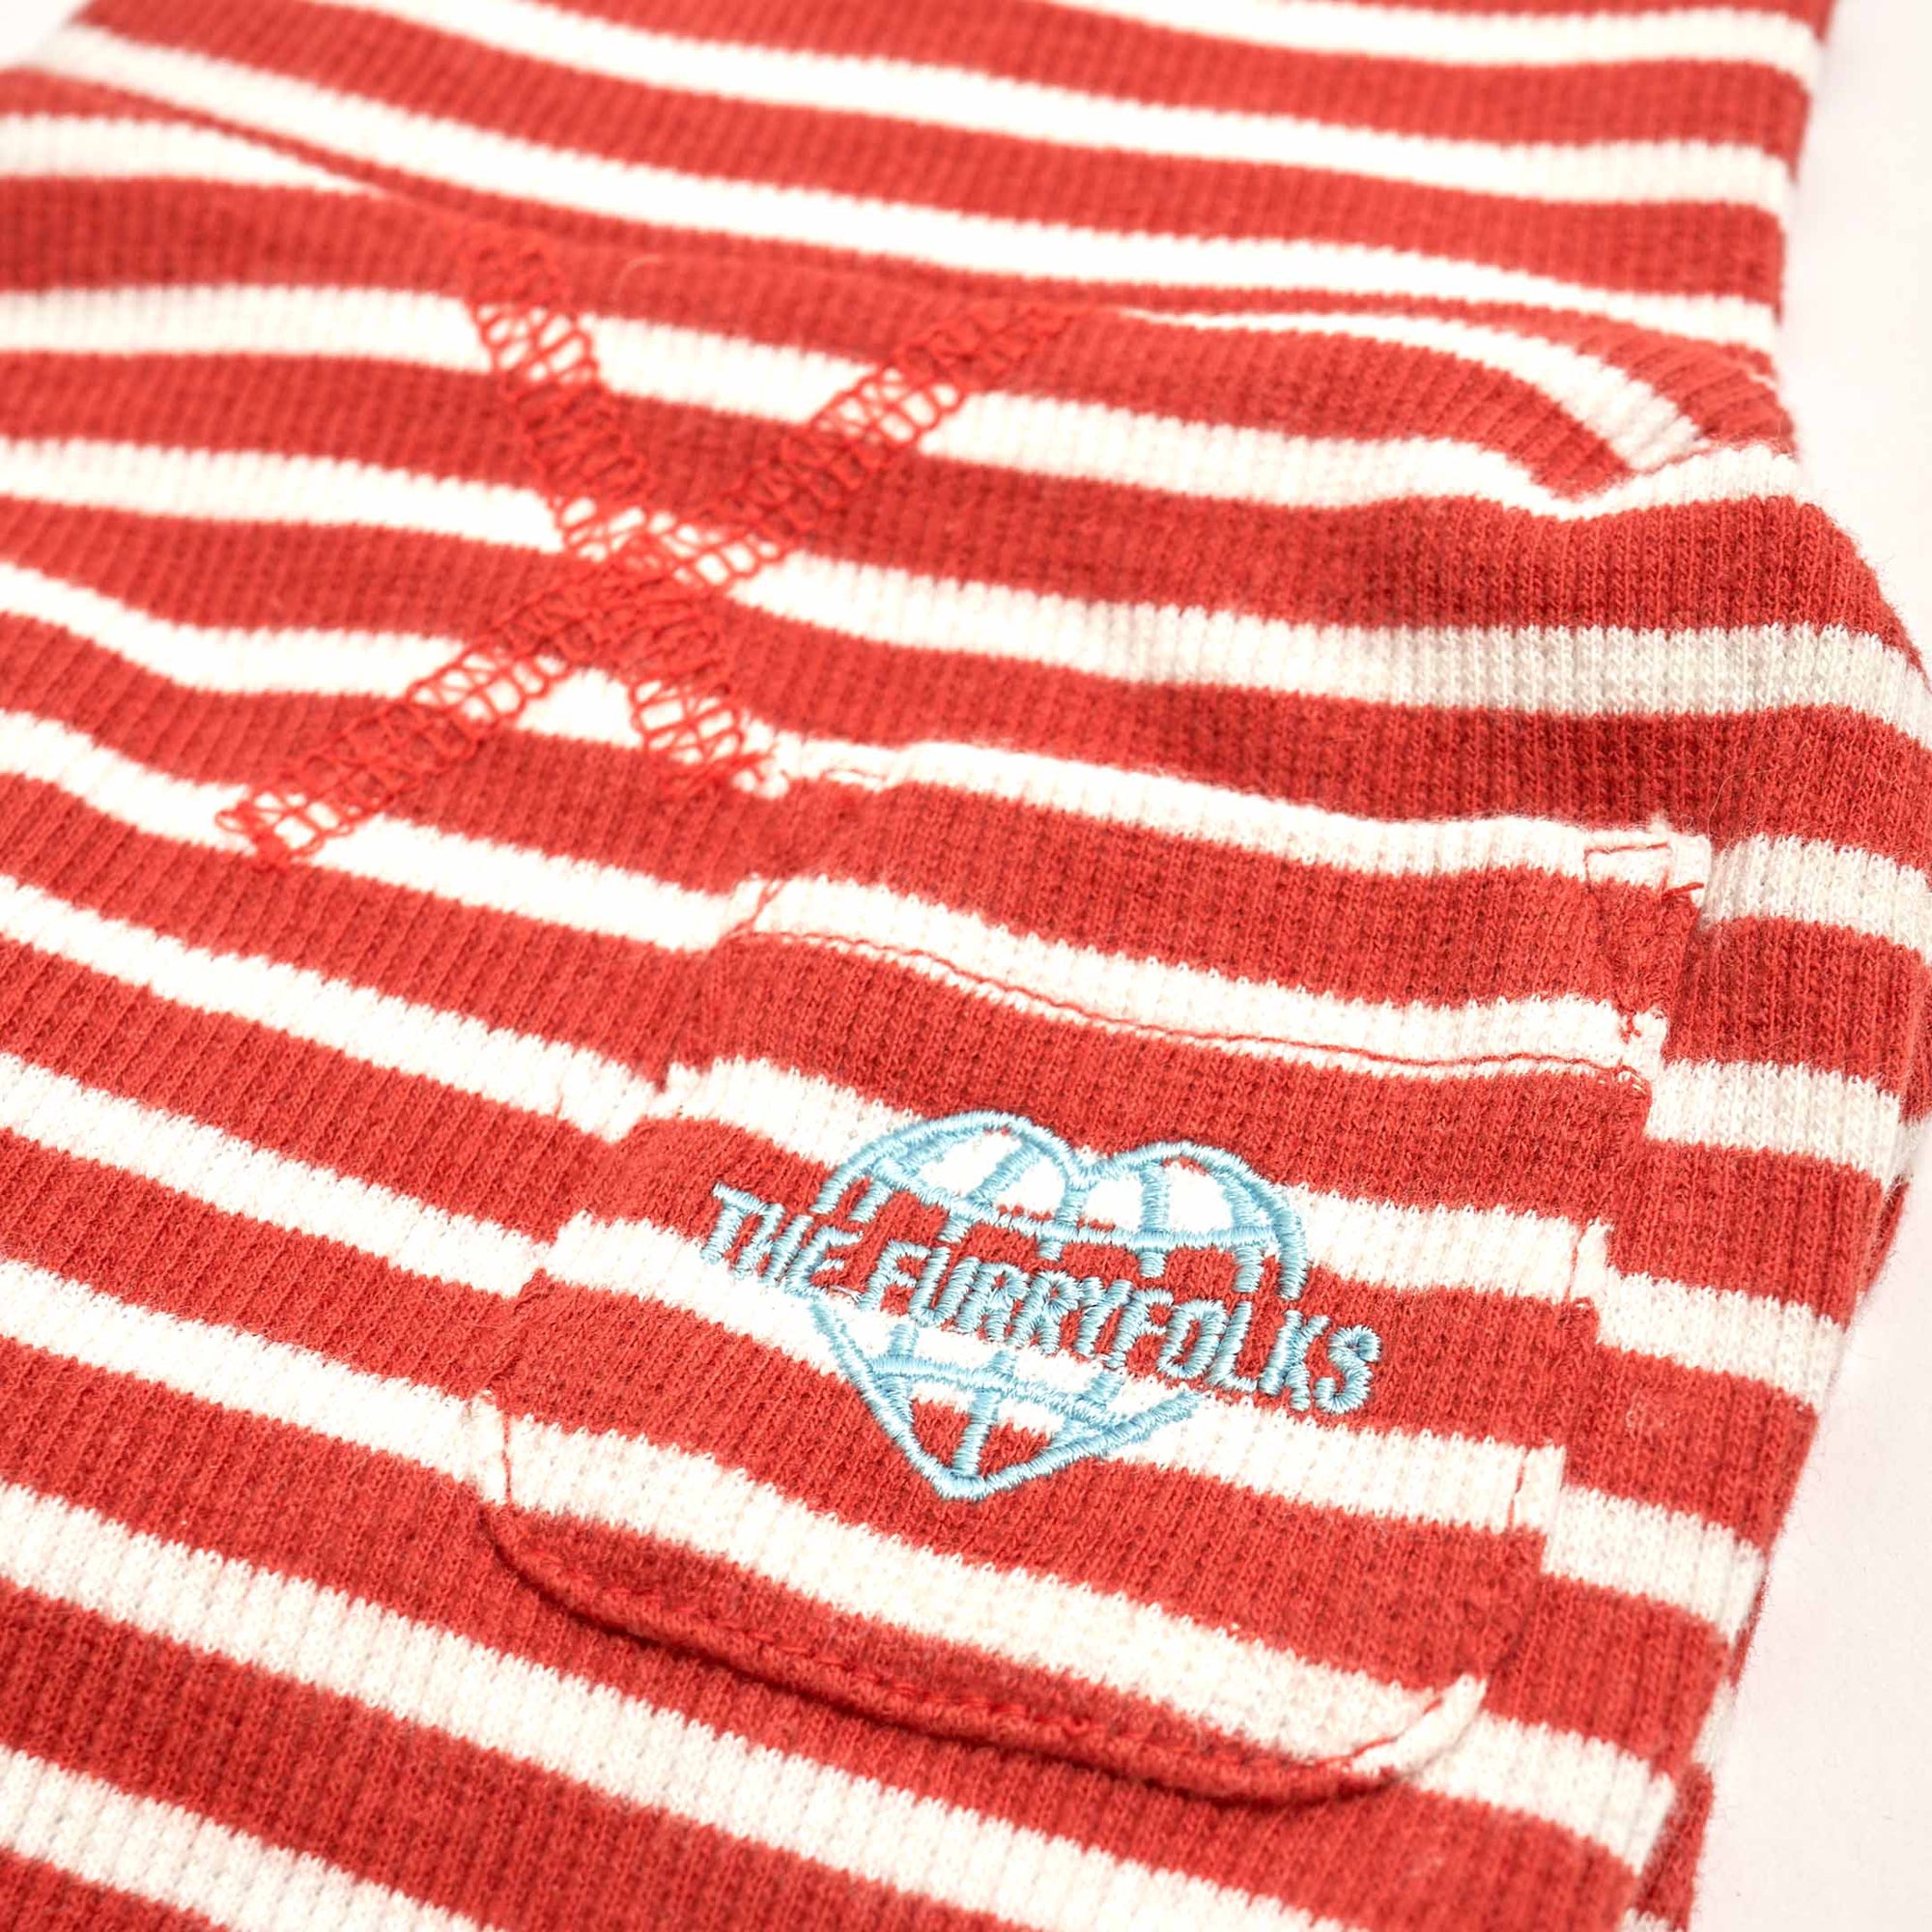 Detail of a Rust & Ivory  striped dog shirt featuring 'THE FURRYFOLKS' logo, embodying pet-friendly fashion.